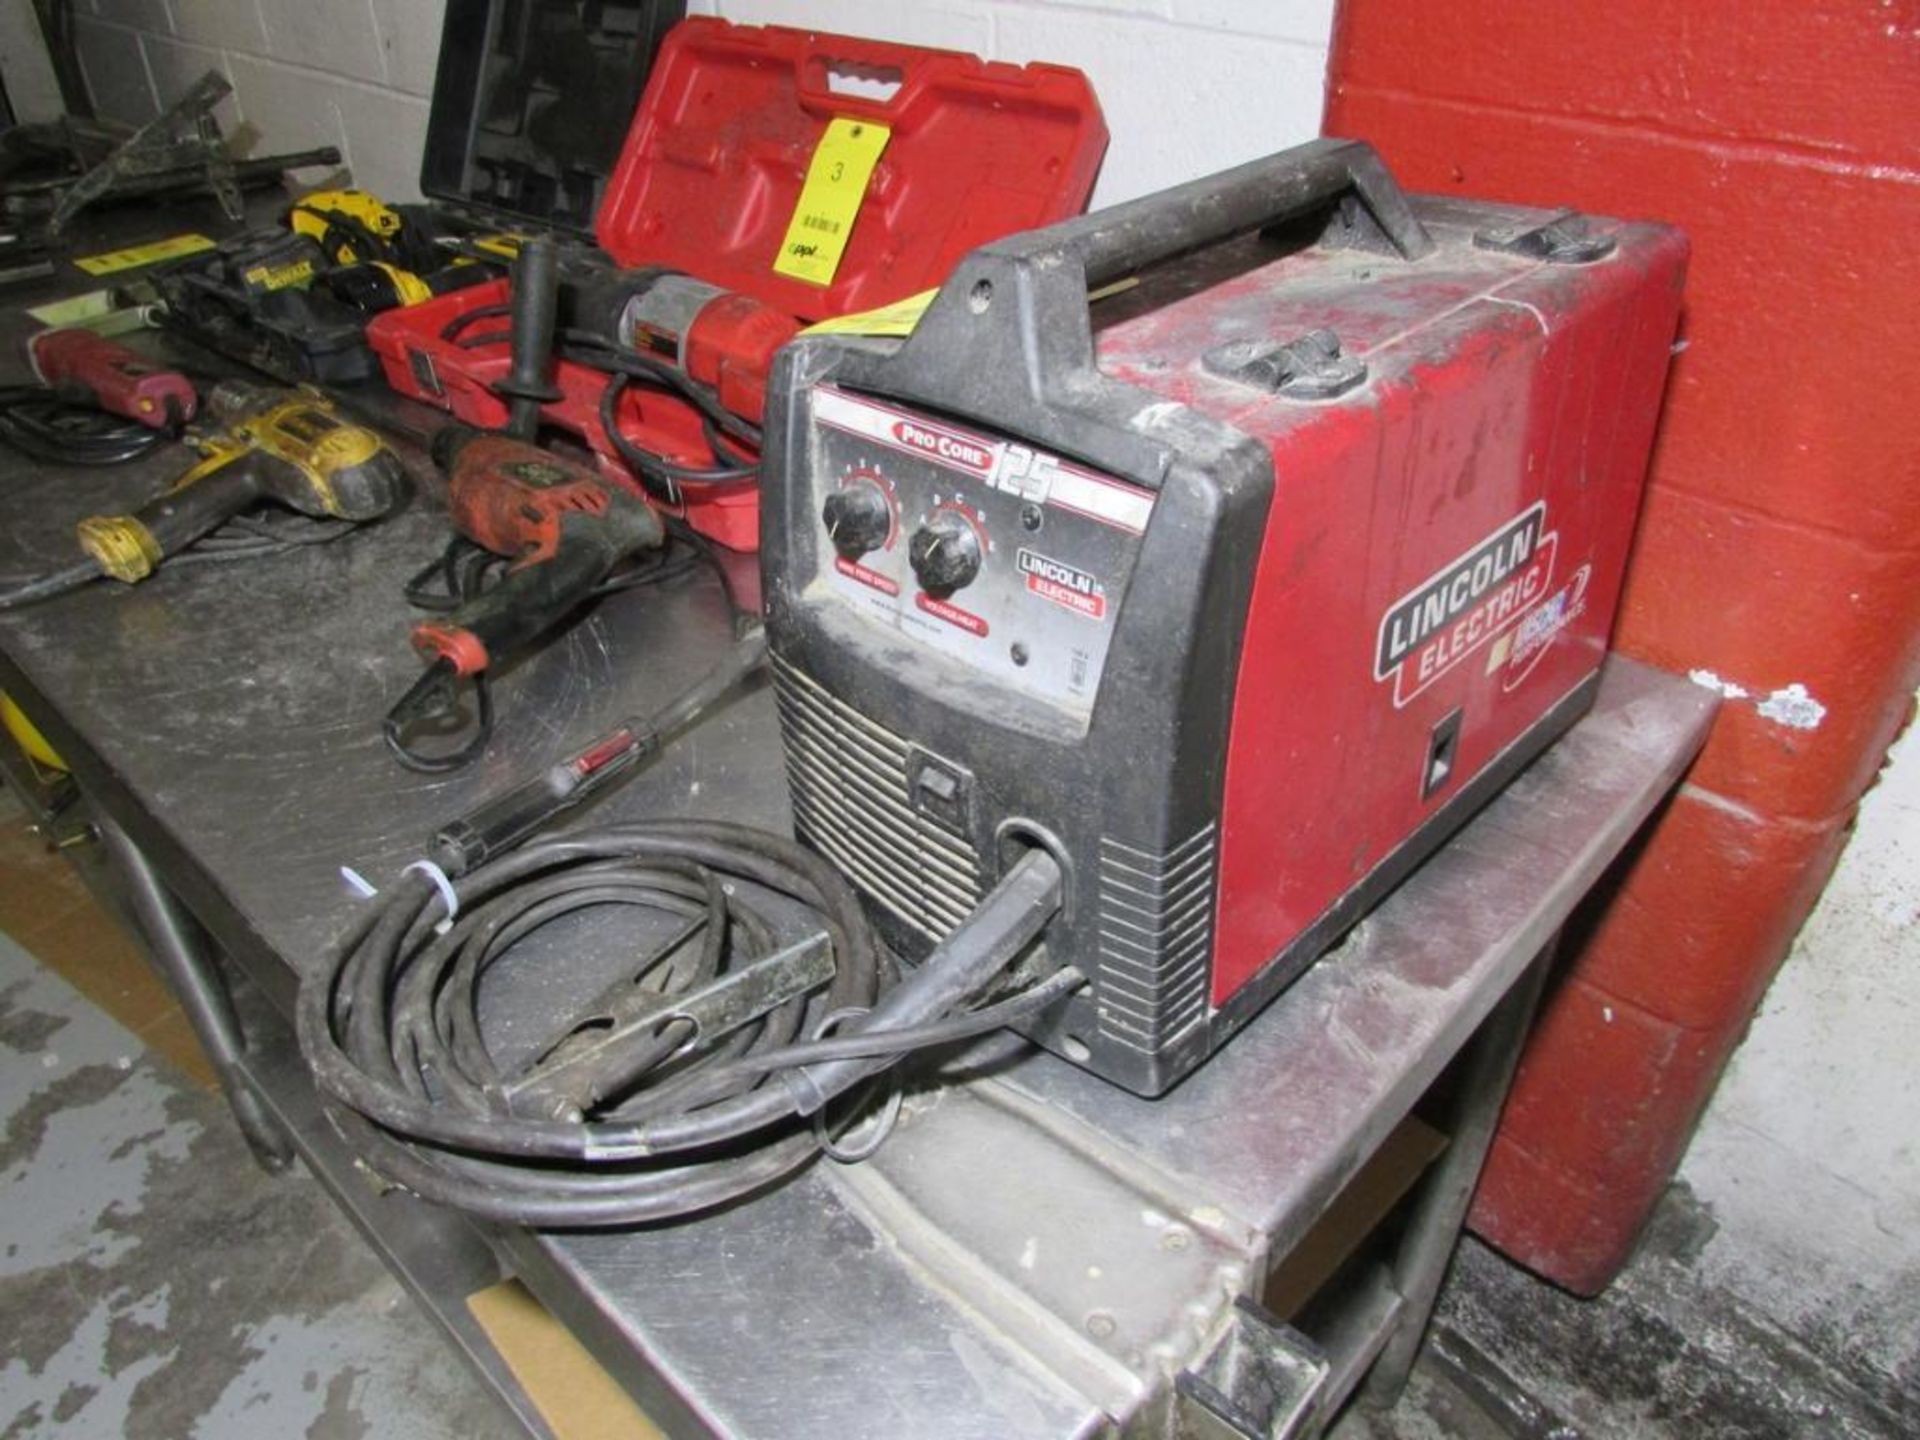 Lincoln Electric Pro Core 125 MIG Wire Welder. 30-125A, 90A 19V 20% Duty Cycle Output, 120V 20A 60Hz